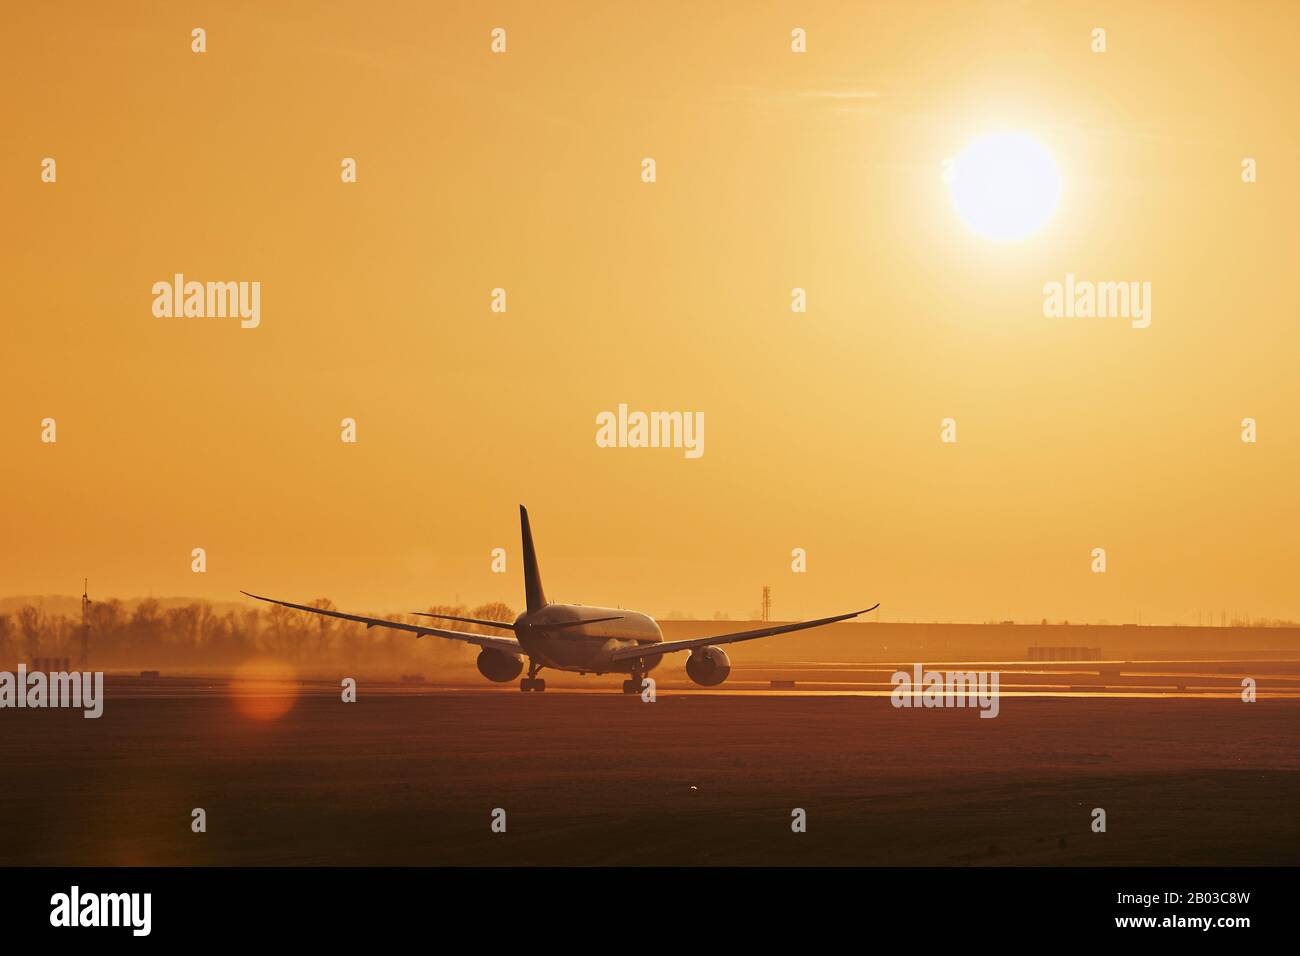 Traffic at airport. Commercial airplane on runway at golden sunset. Stock Photo